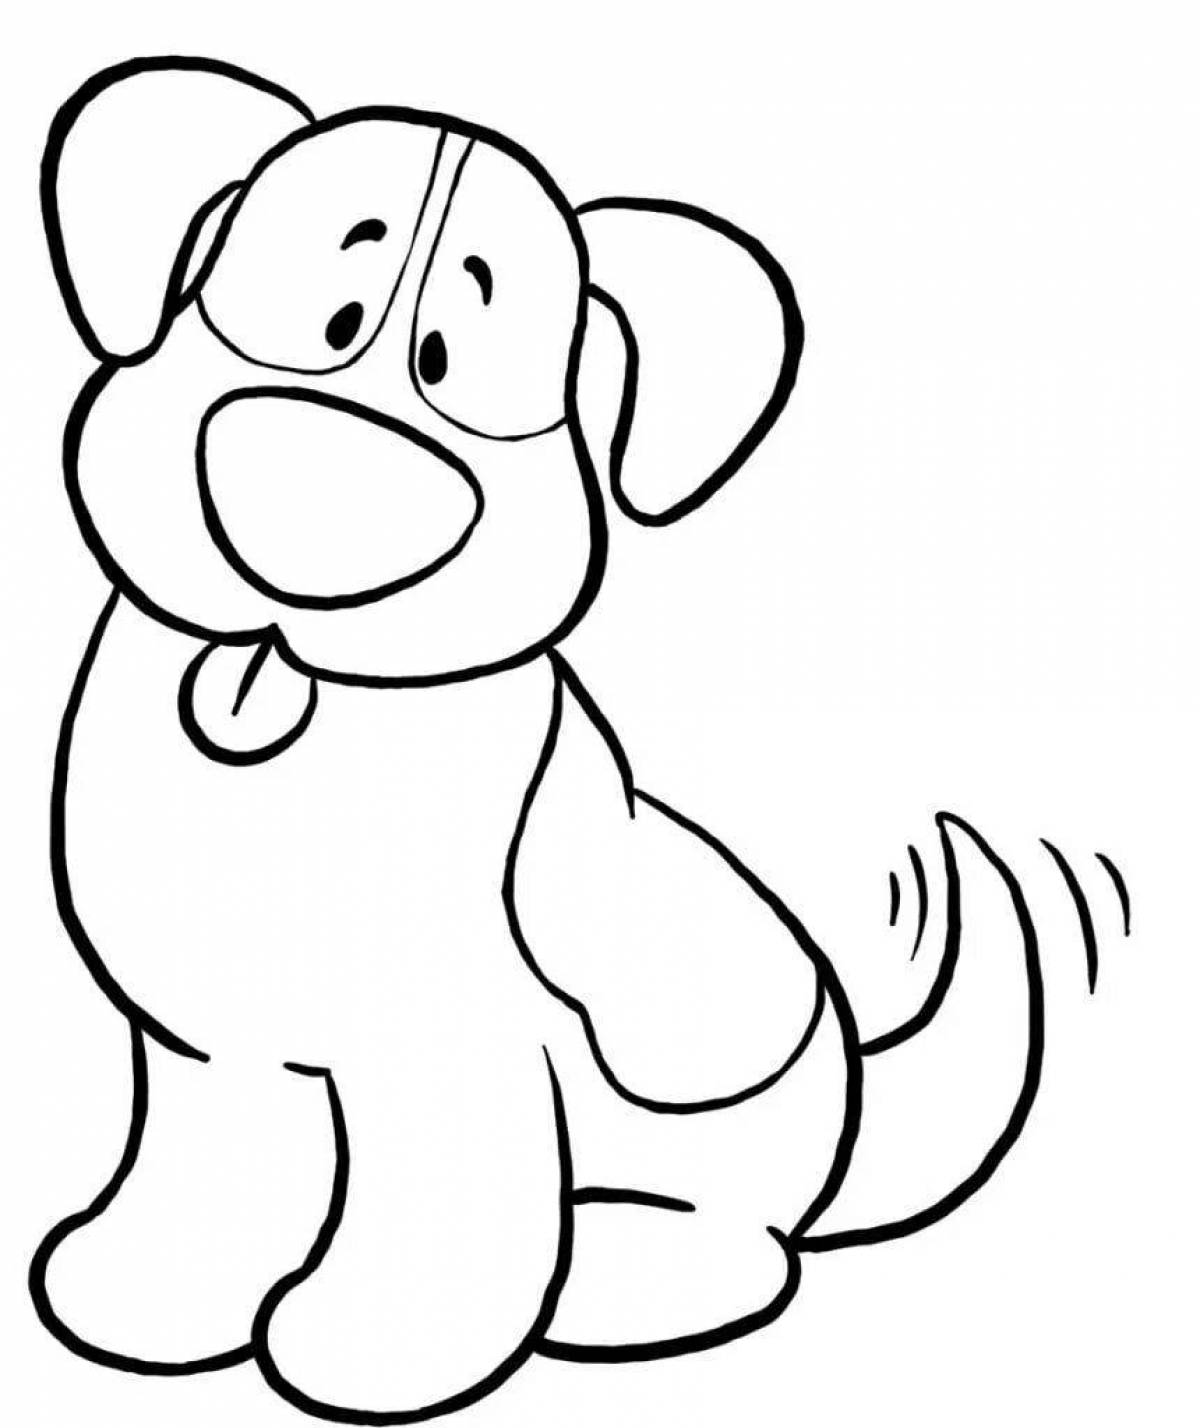 Attractive dog coloring book for kids